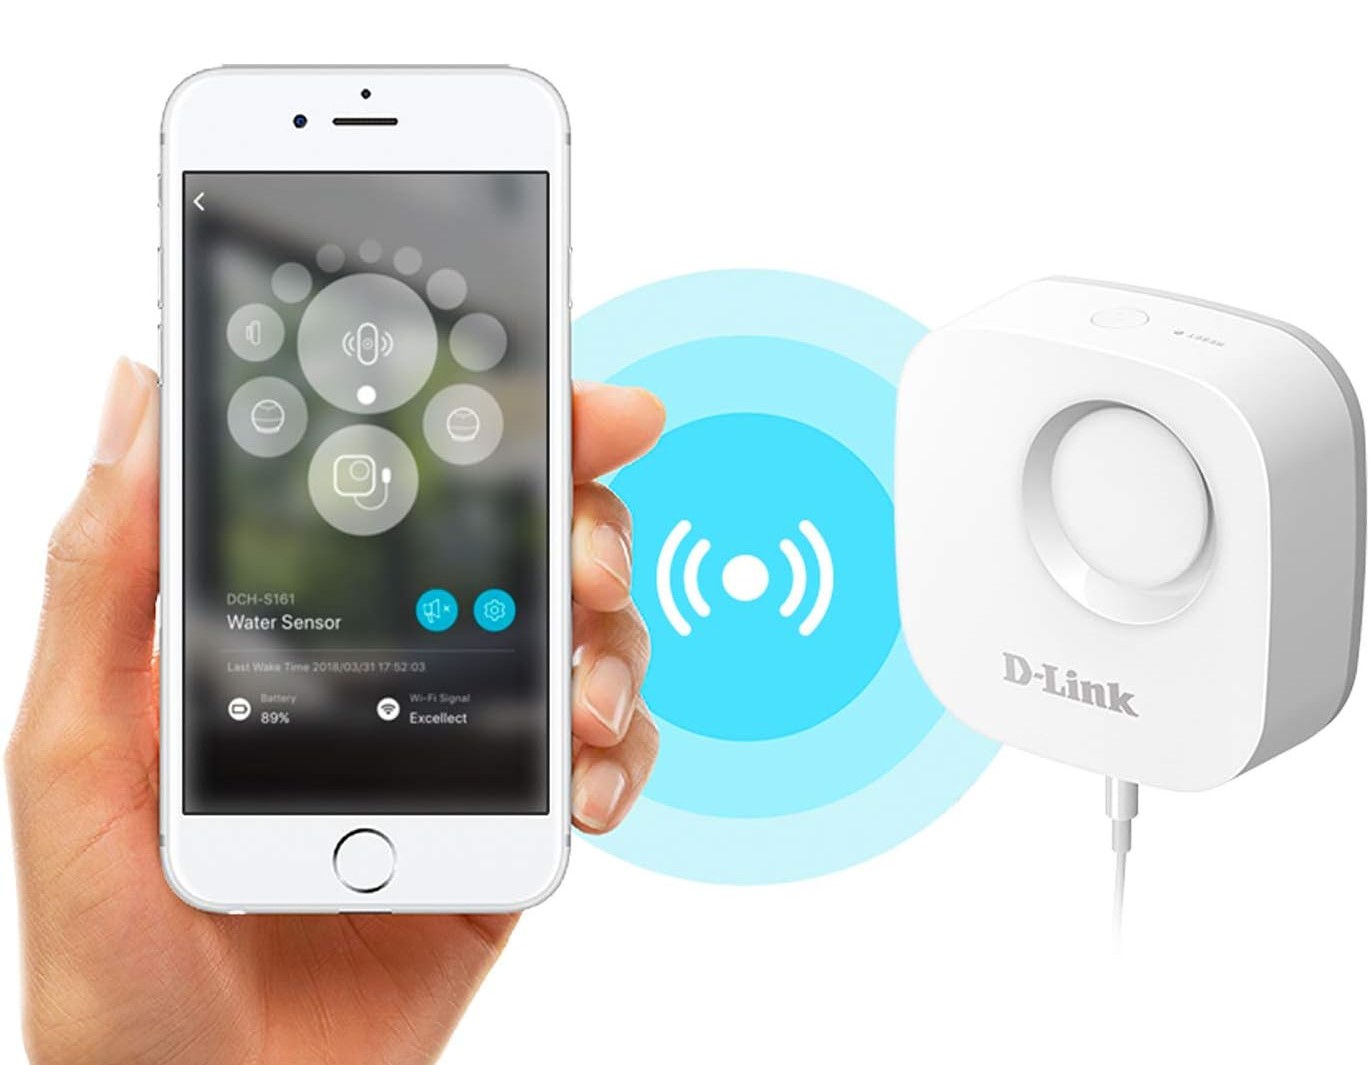 How To Enable Push Notifications For MyDlink Wi-Fi Motion Detector